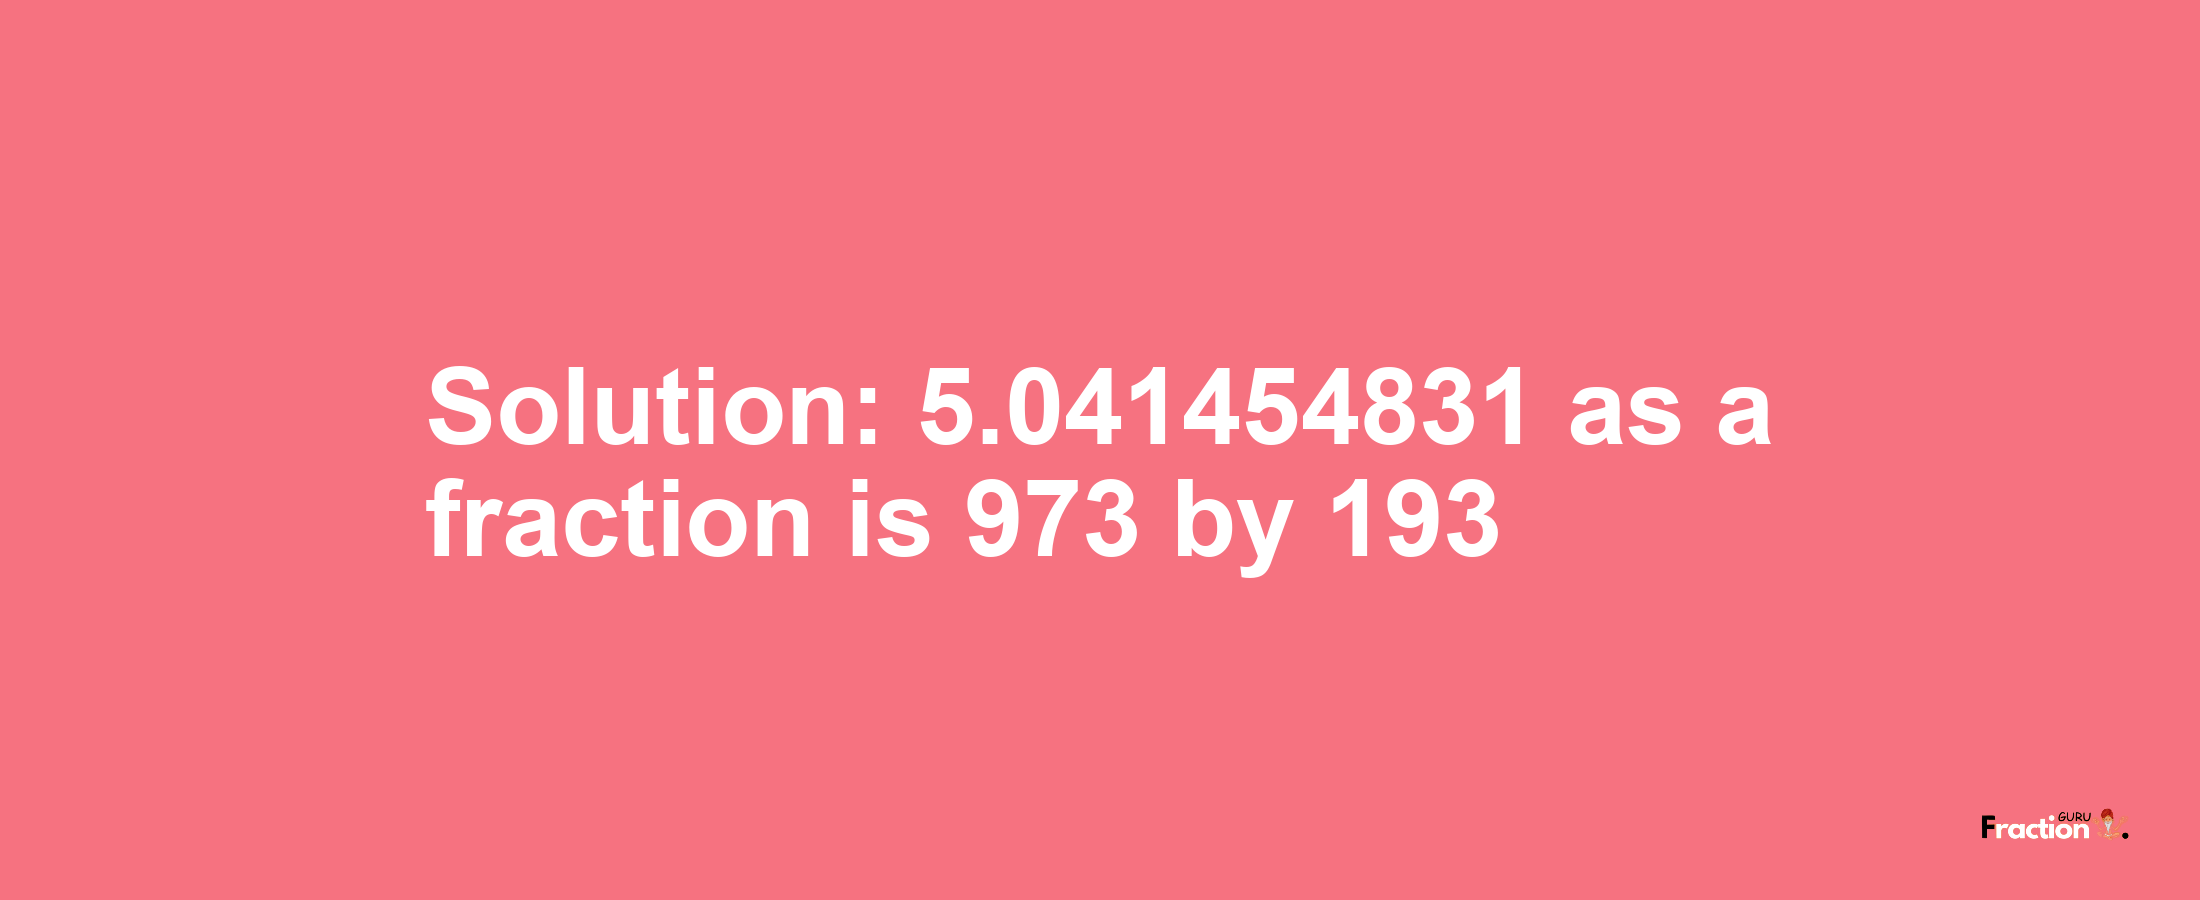 Solution:5.041454831 as a fraction is 973/193